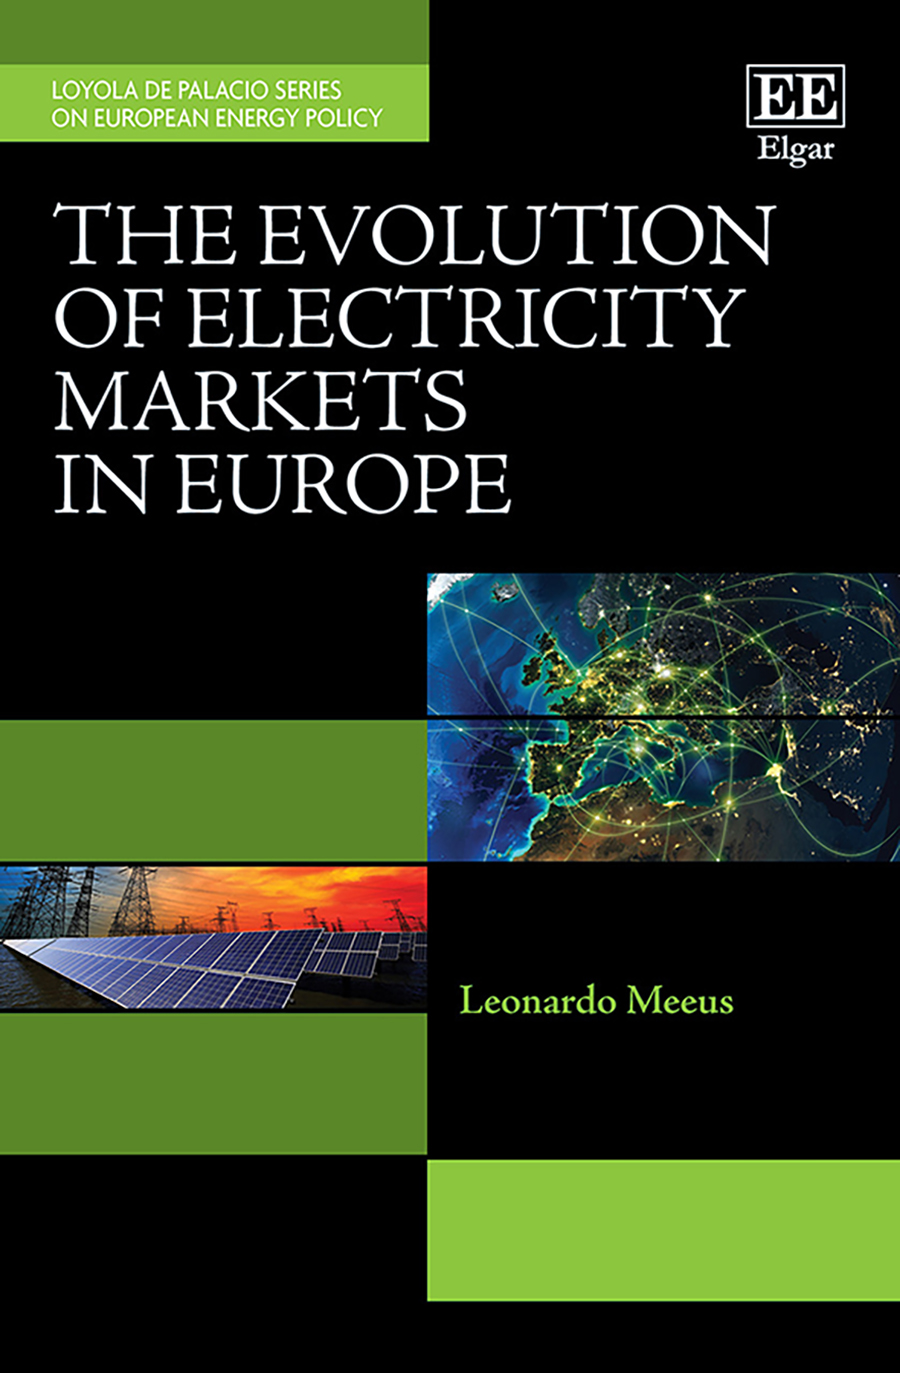 The Evolution of Electricity Markets in Europe